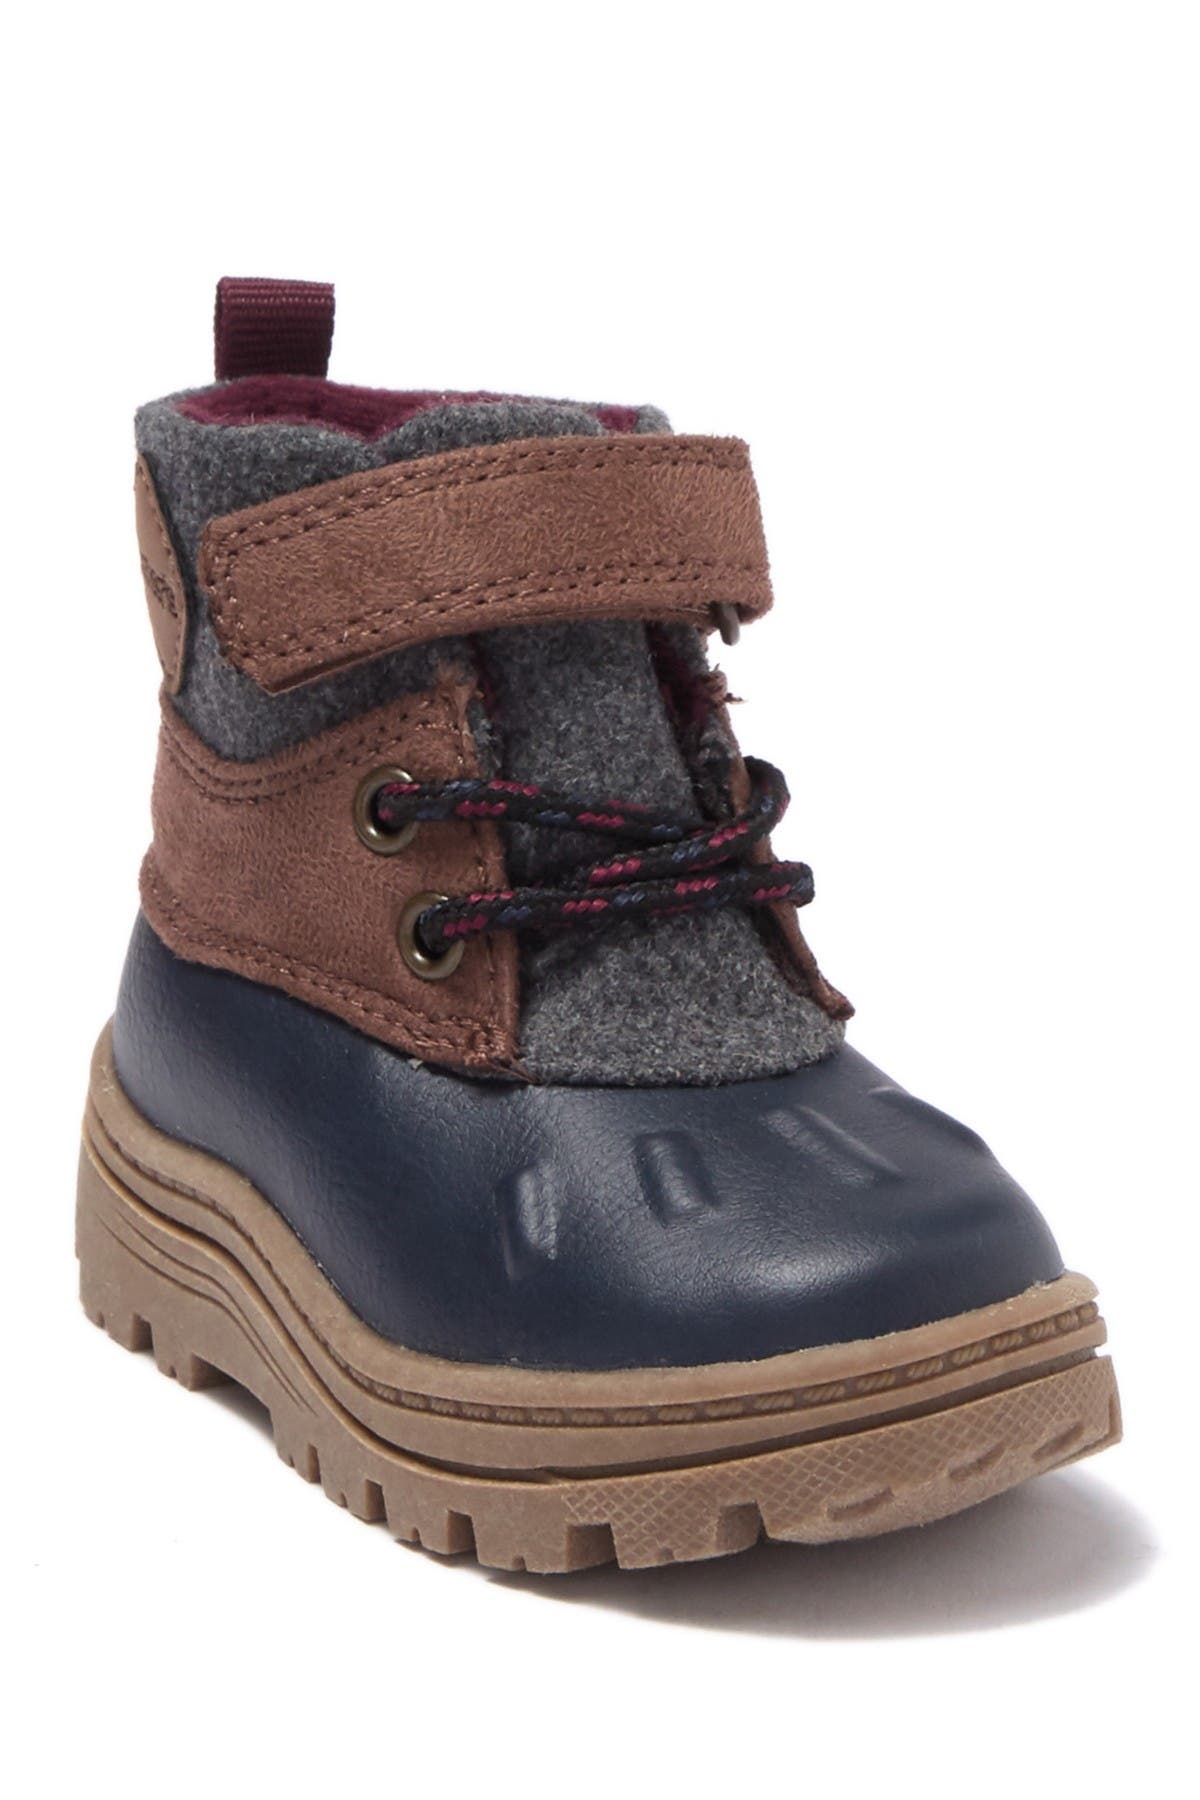 carters duck boots